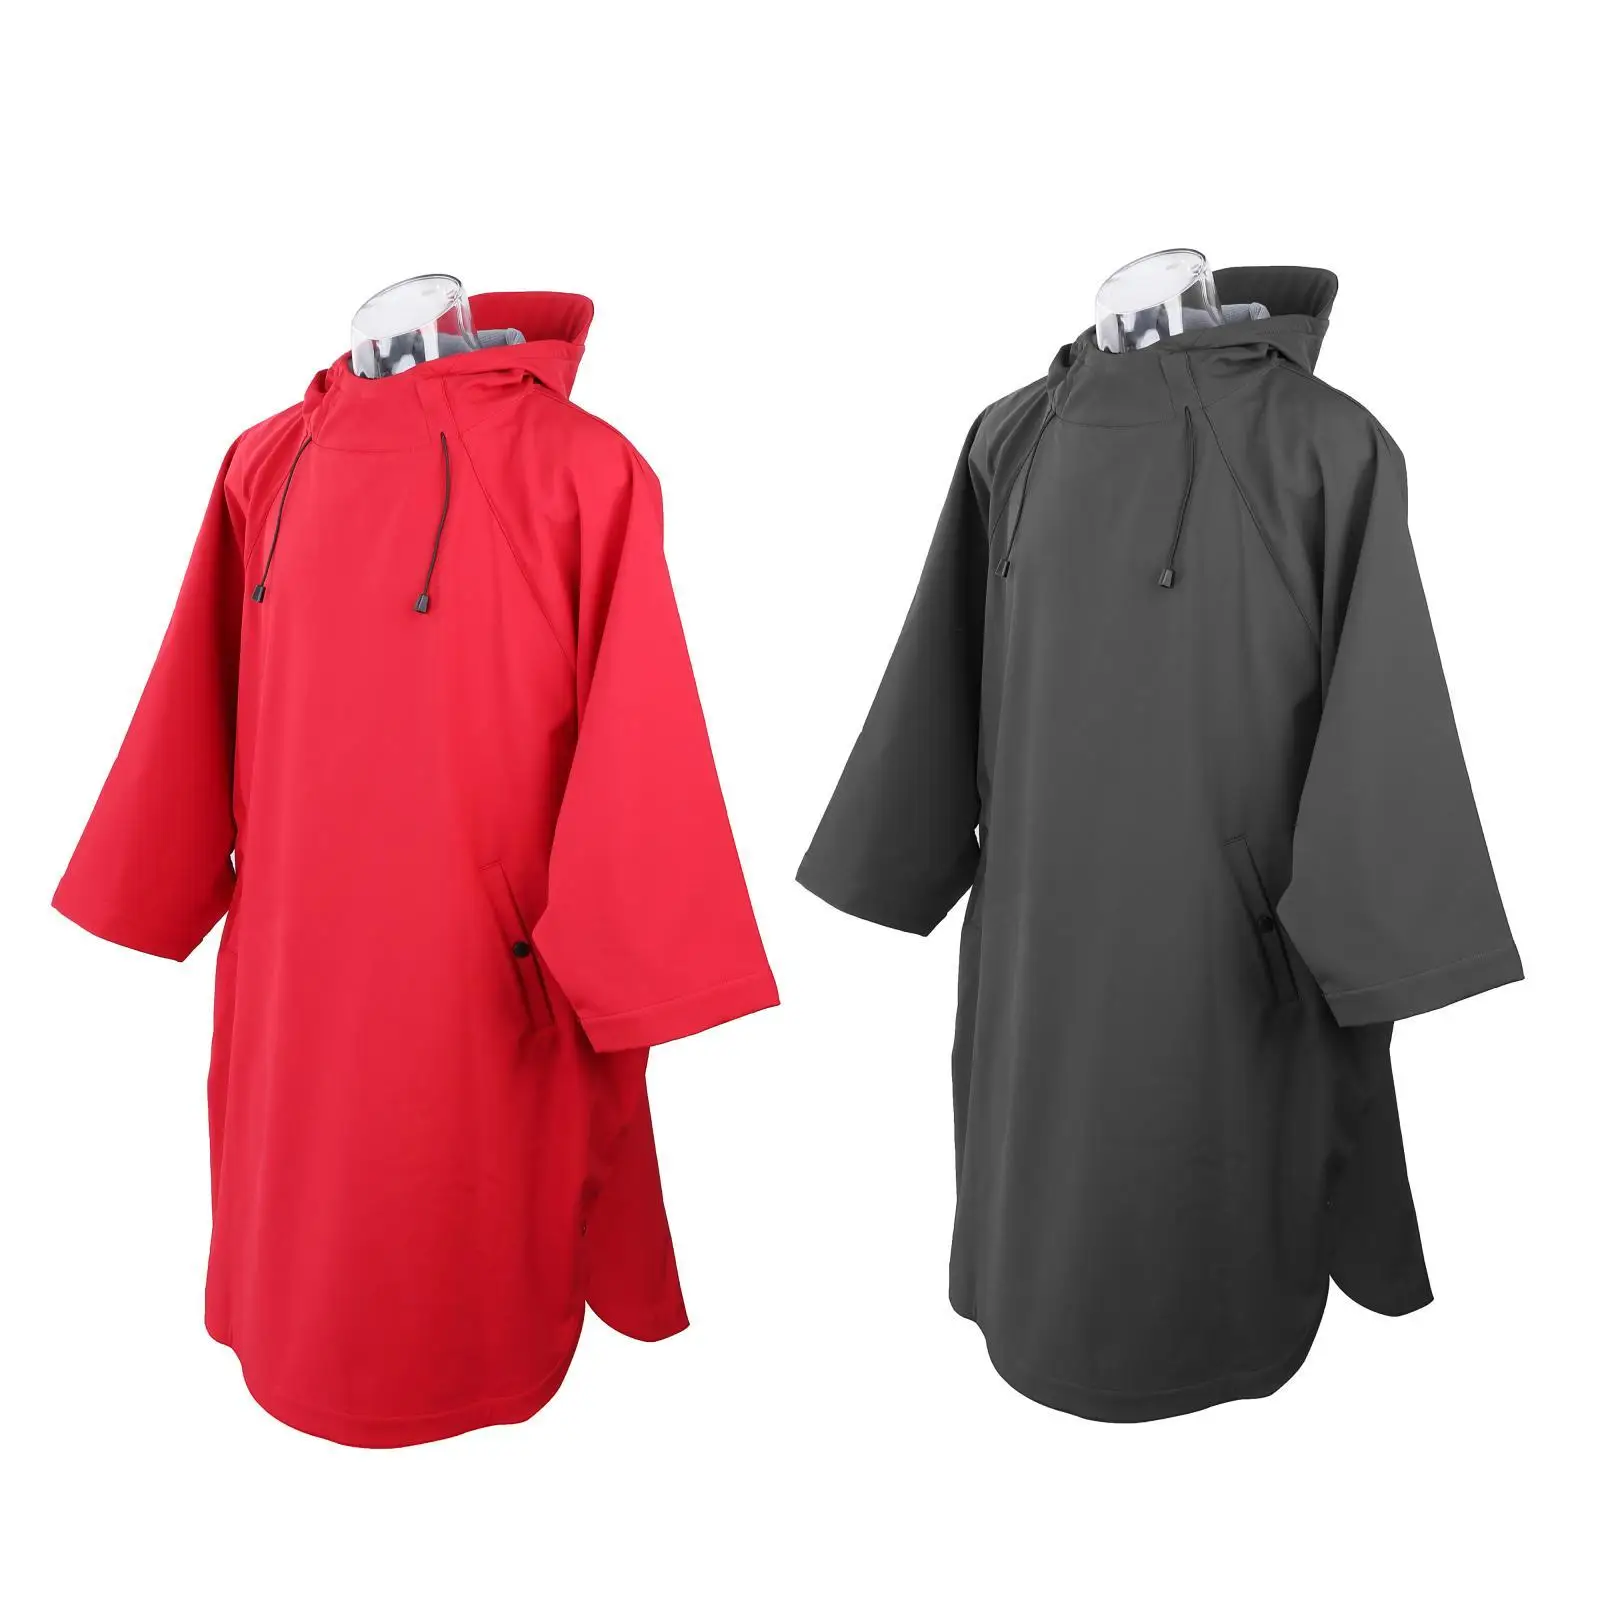 Beach Surfing Changing Robe Jacket Thermal Warm Overcoat Rain Coat Women`s Men`s Sports Poncho Cape Suit